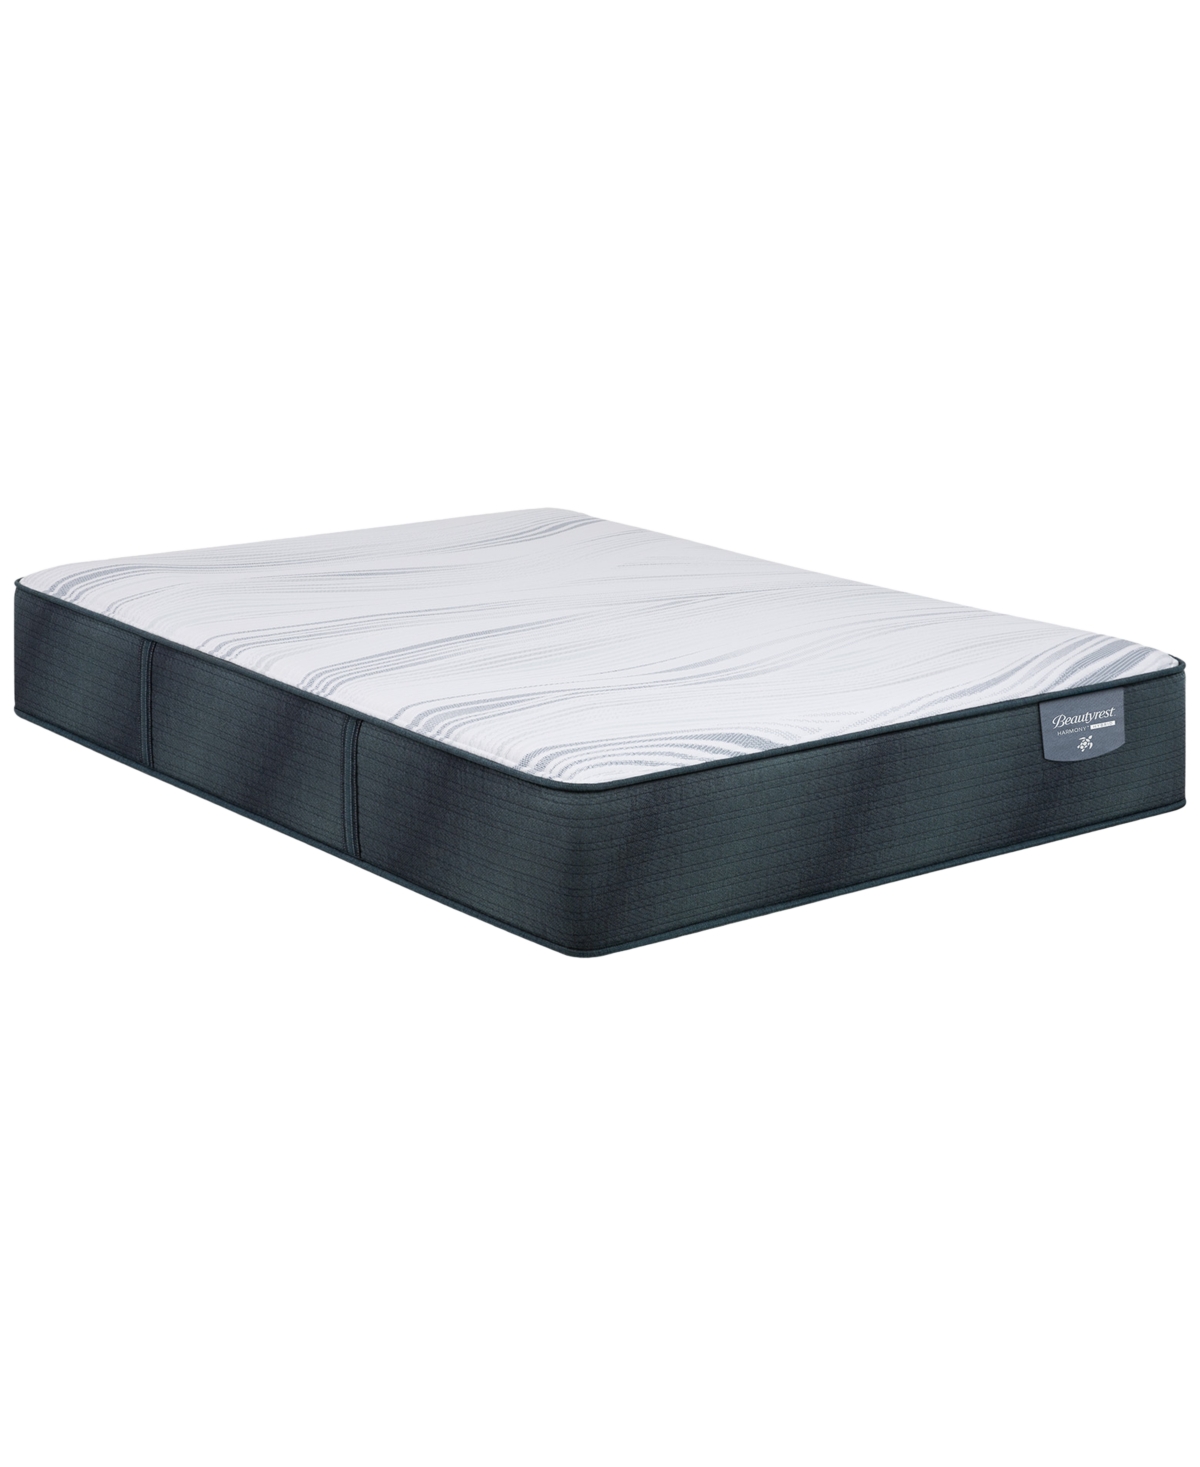 Shop Beautyrest Harmony Hybrid Driftwood Bay 12" Hybrid Firm Mattress In No Color